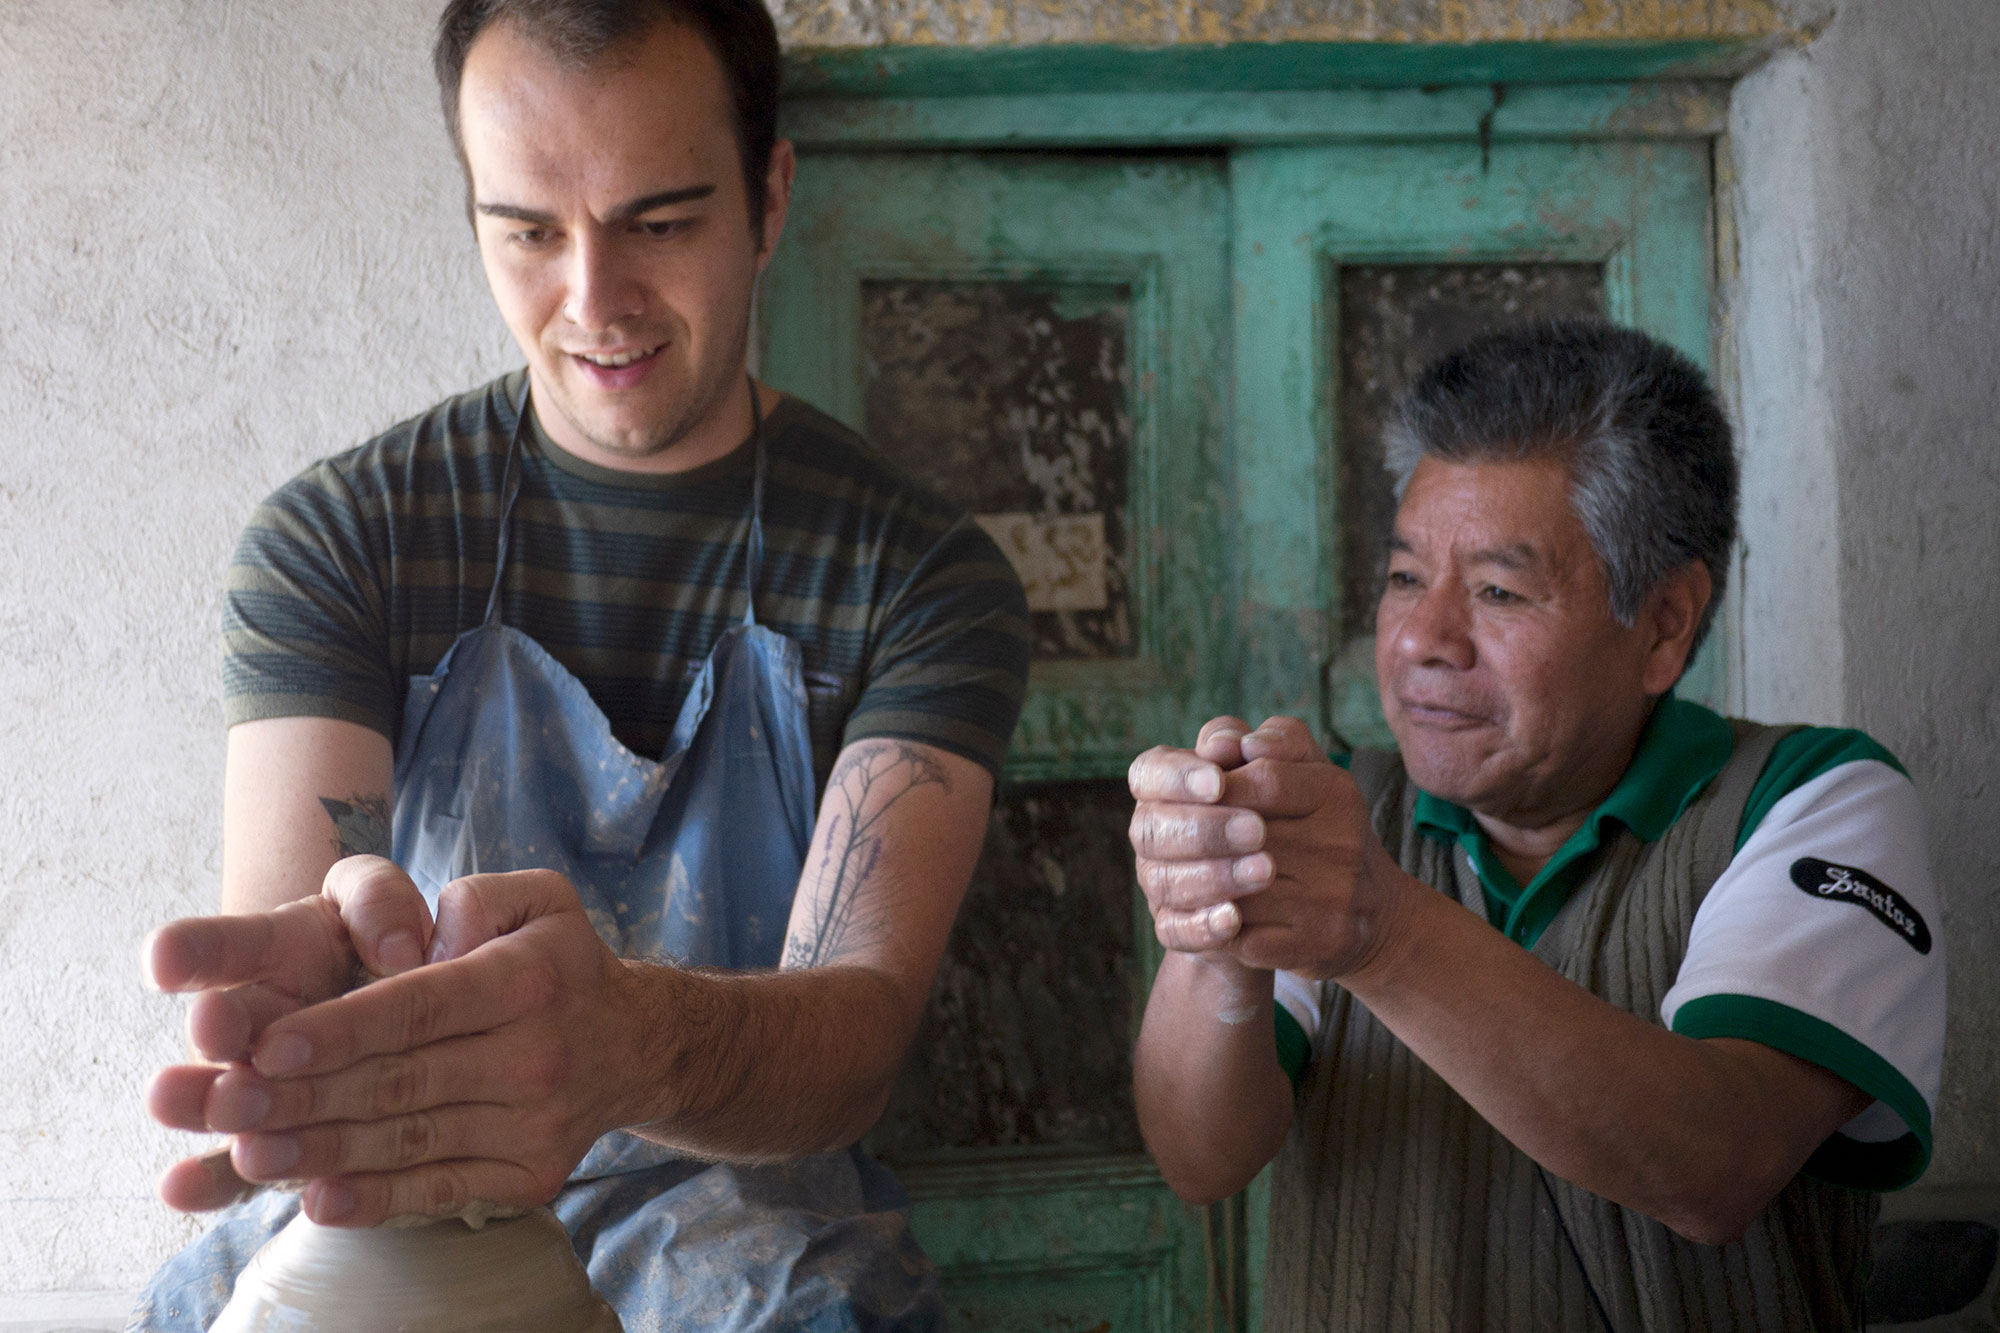 Student from Seattle University visits Nicaraguan craftspeople